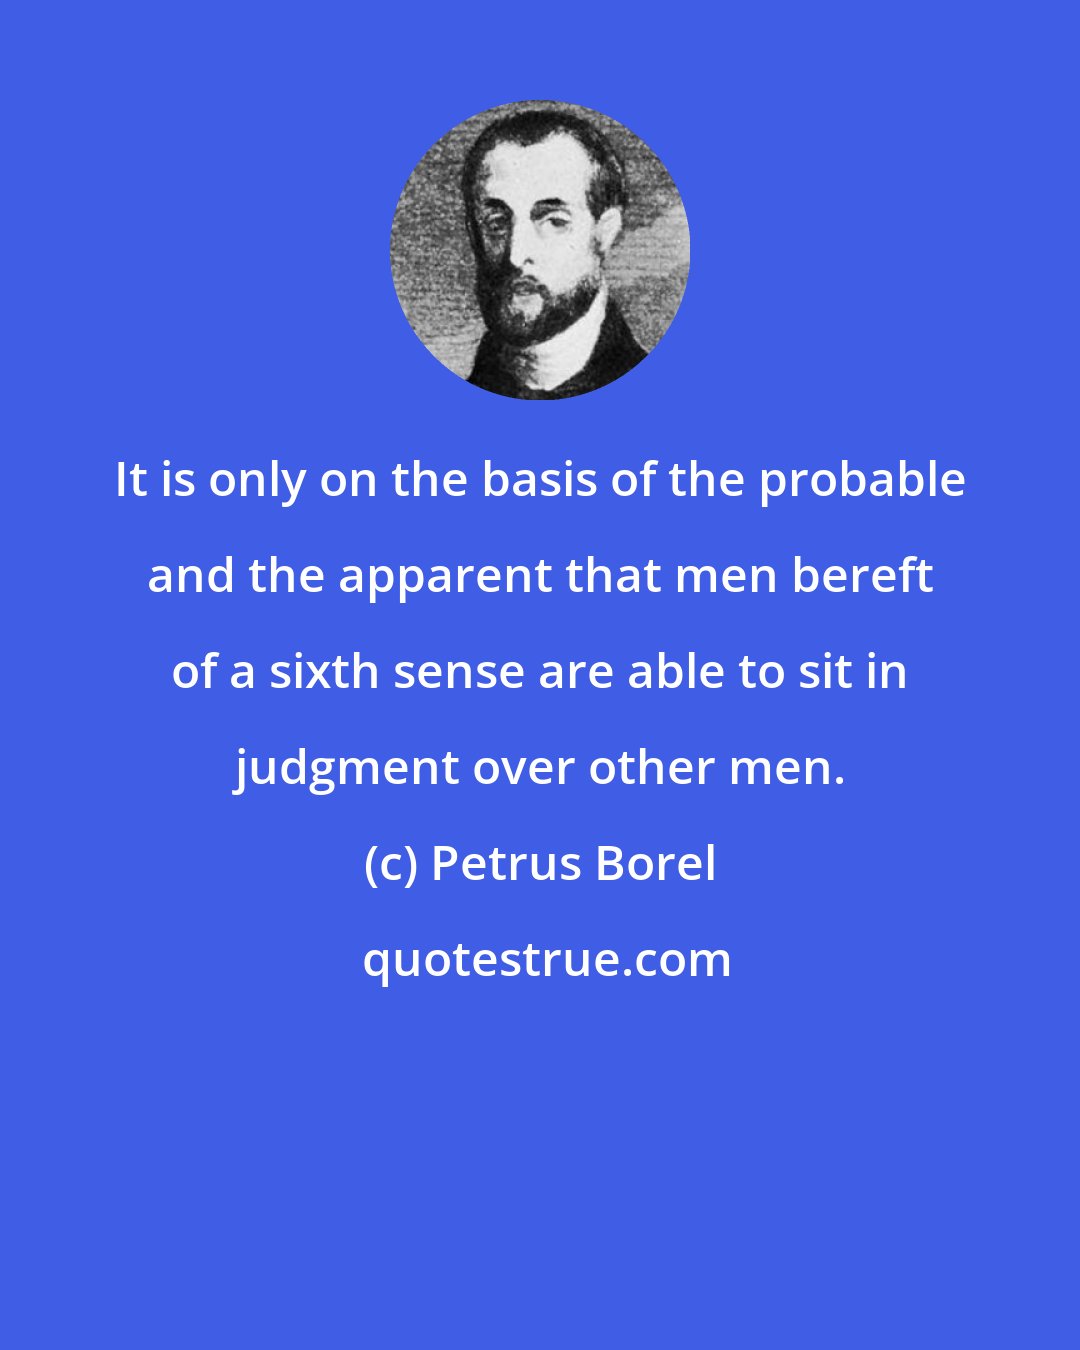 Petrus Borel: It is only on the basis of the probable and the apparent that men bereft of a sixth sense are able to sit in judgment over other men.